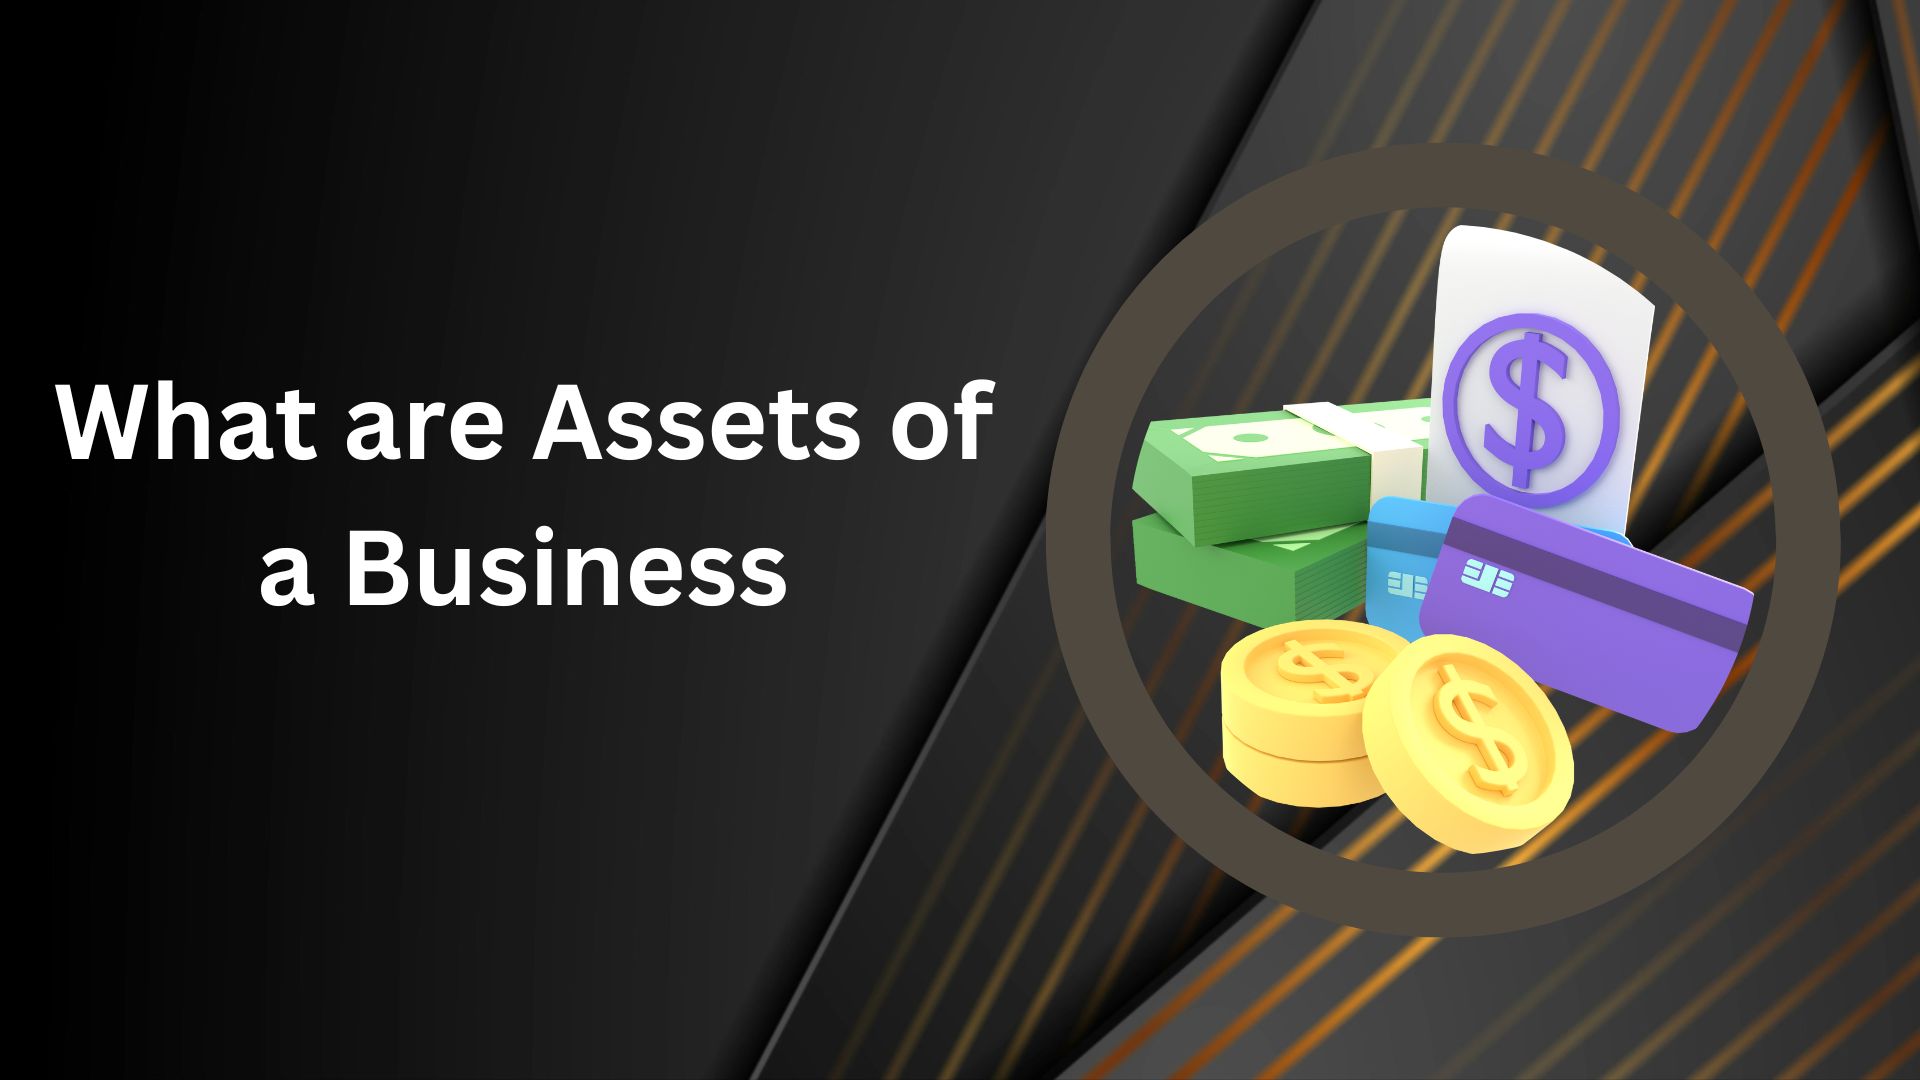 What are Assets of a Business